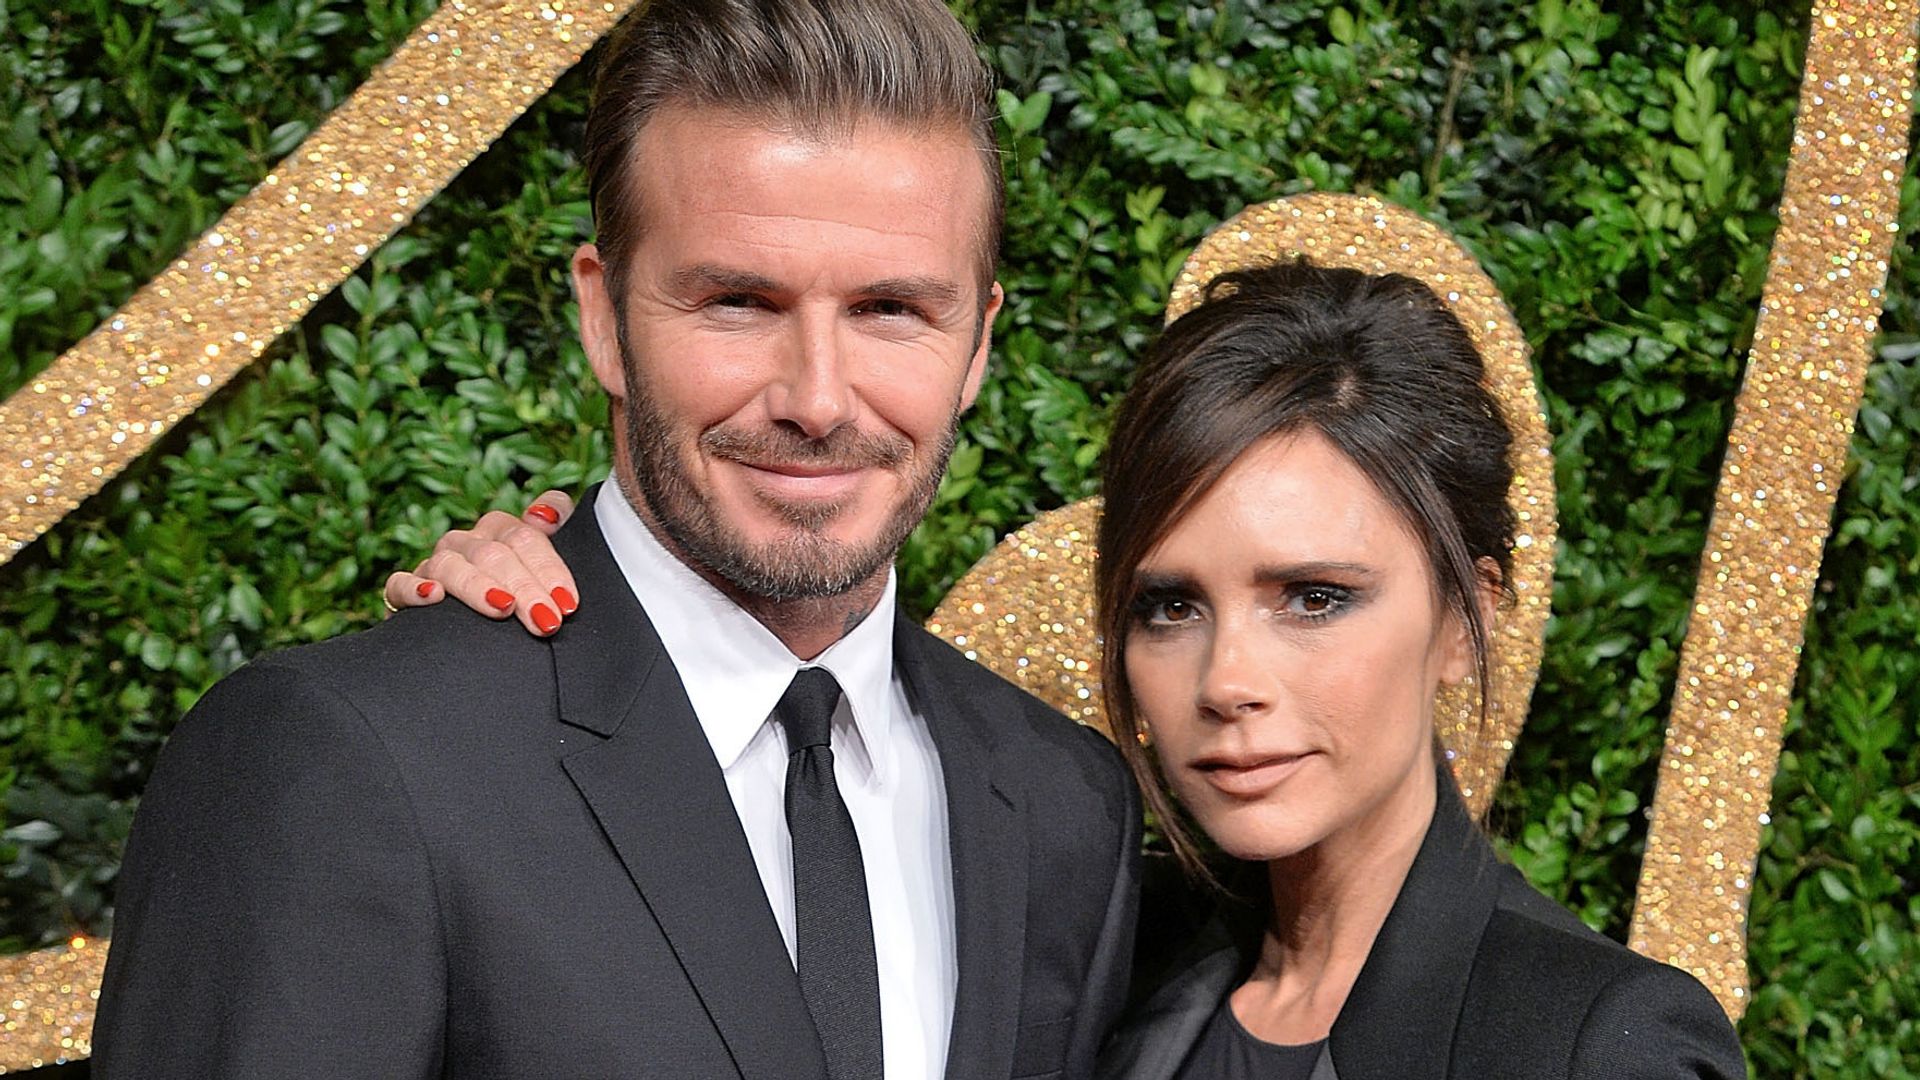 Victoria and David Beckham smile at the camera at a red carpet event